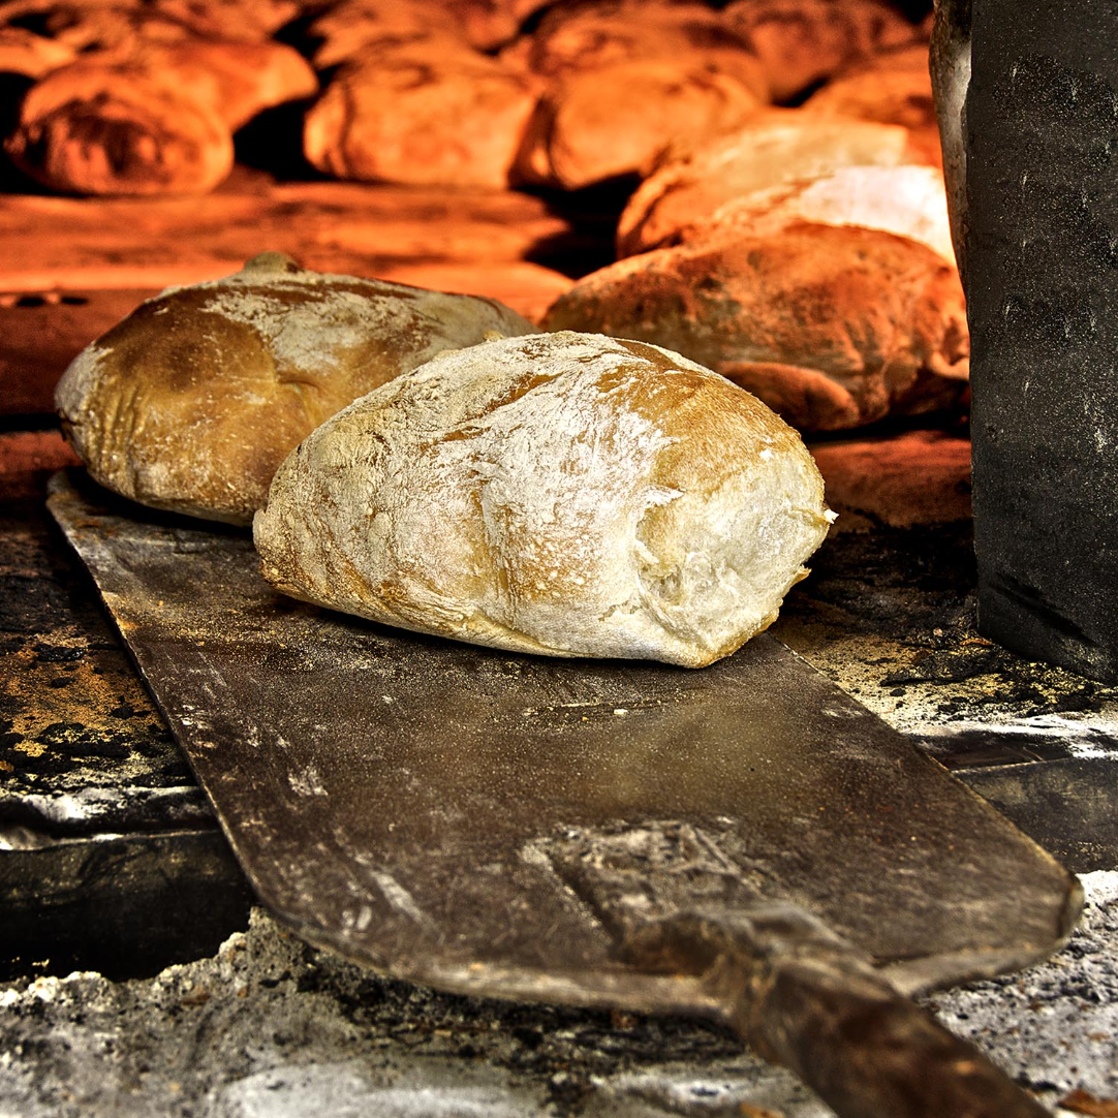 Bread oven party – 10 a.m. to 17 p.m.